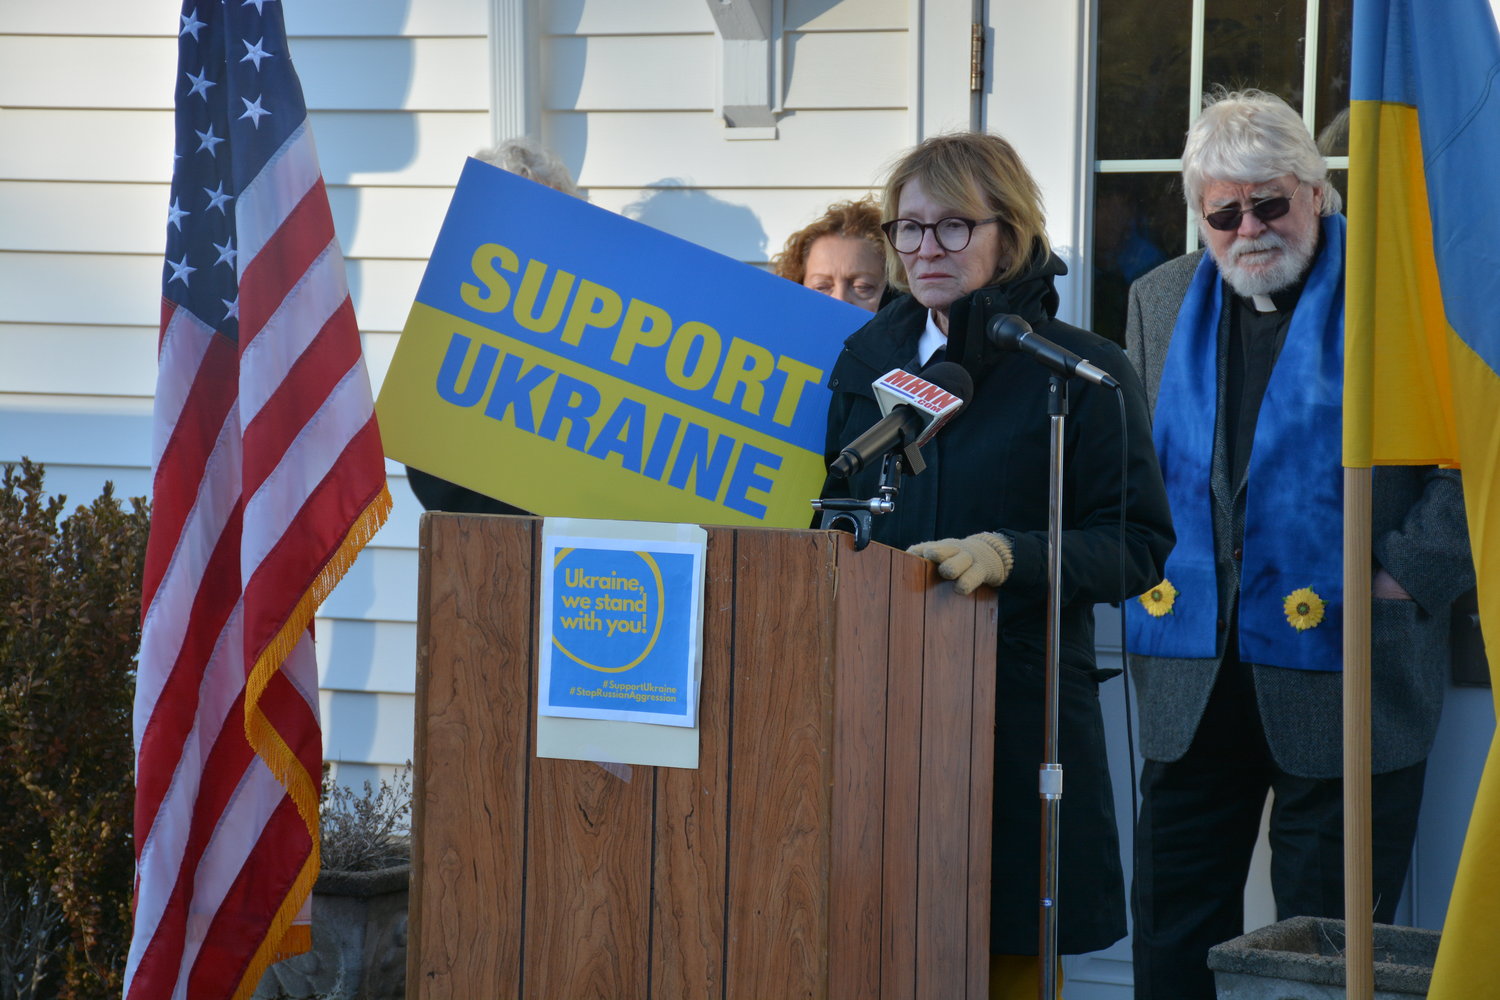 Assemblywoman Aileen Gunther shares a few words. "The United States really has to kick up their support of Ukraine," she said.